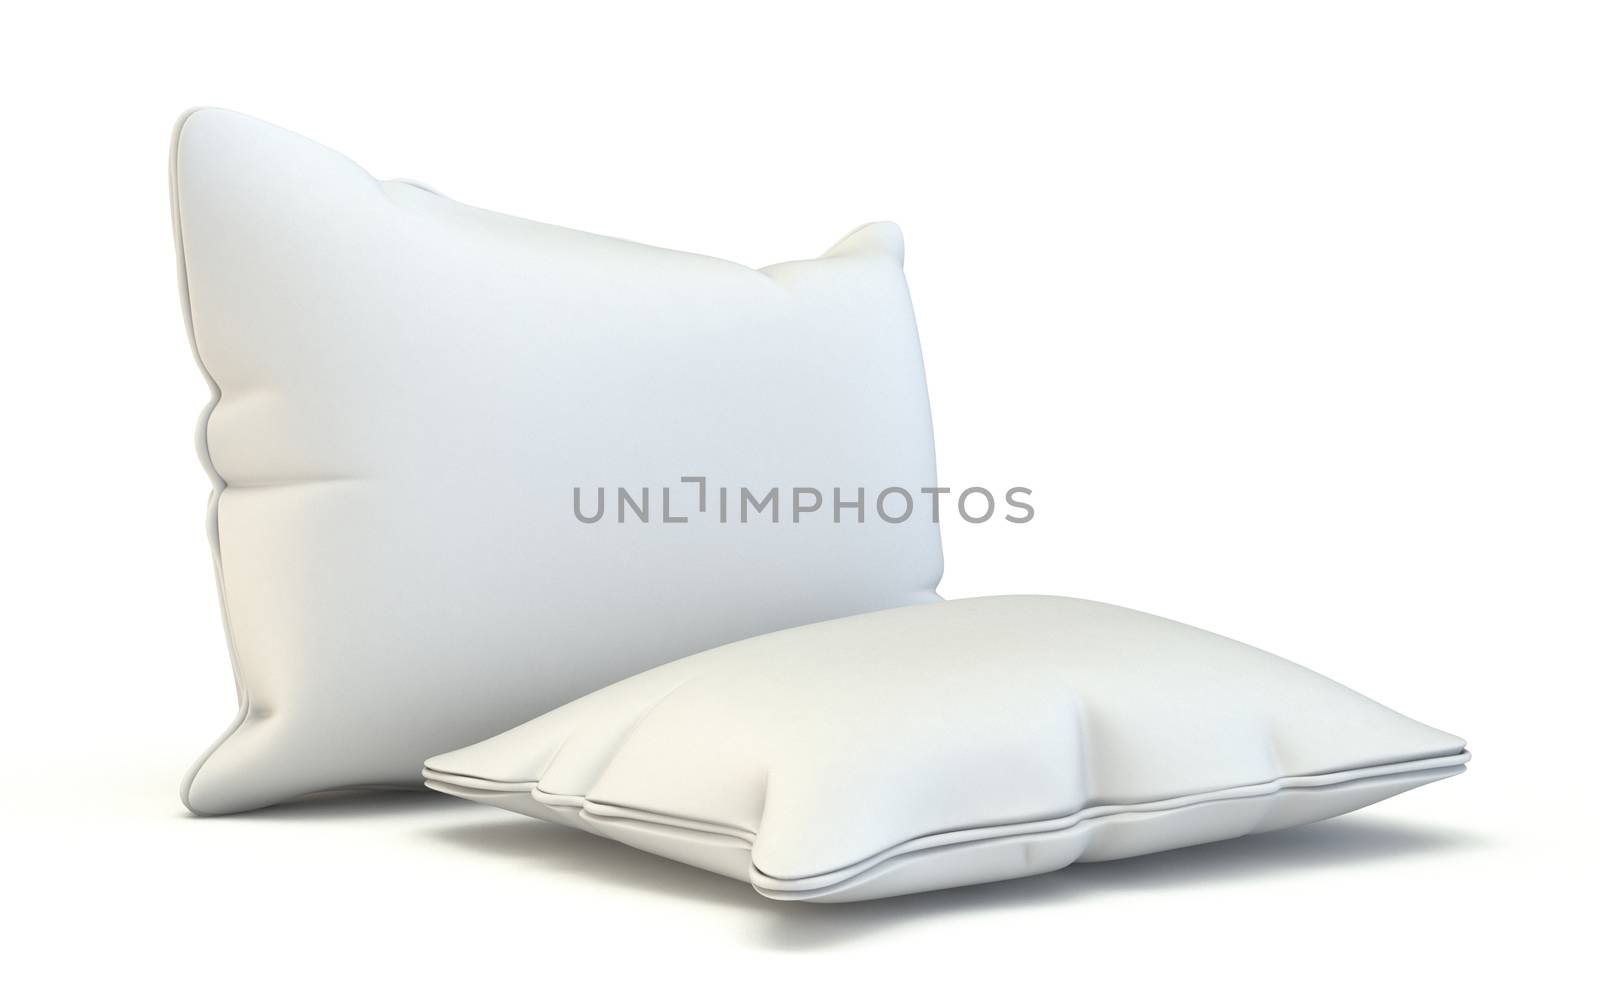 Square pillows 3D by djmilic